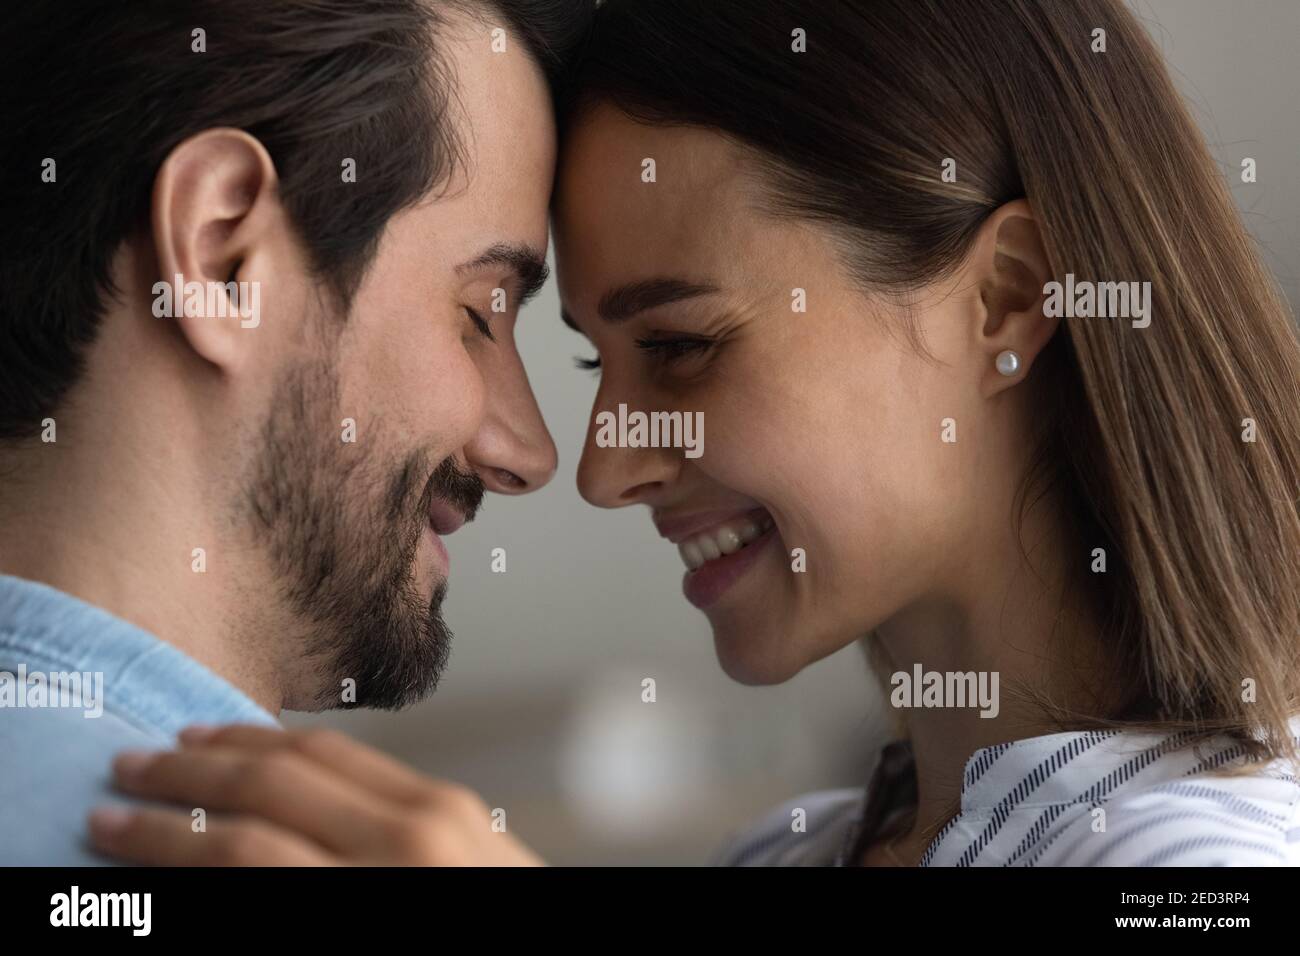 Affectionate couple in love embrace touch foreheads express tender feelings Stock Photo